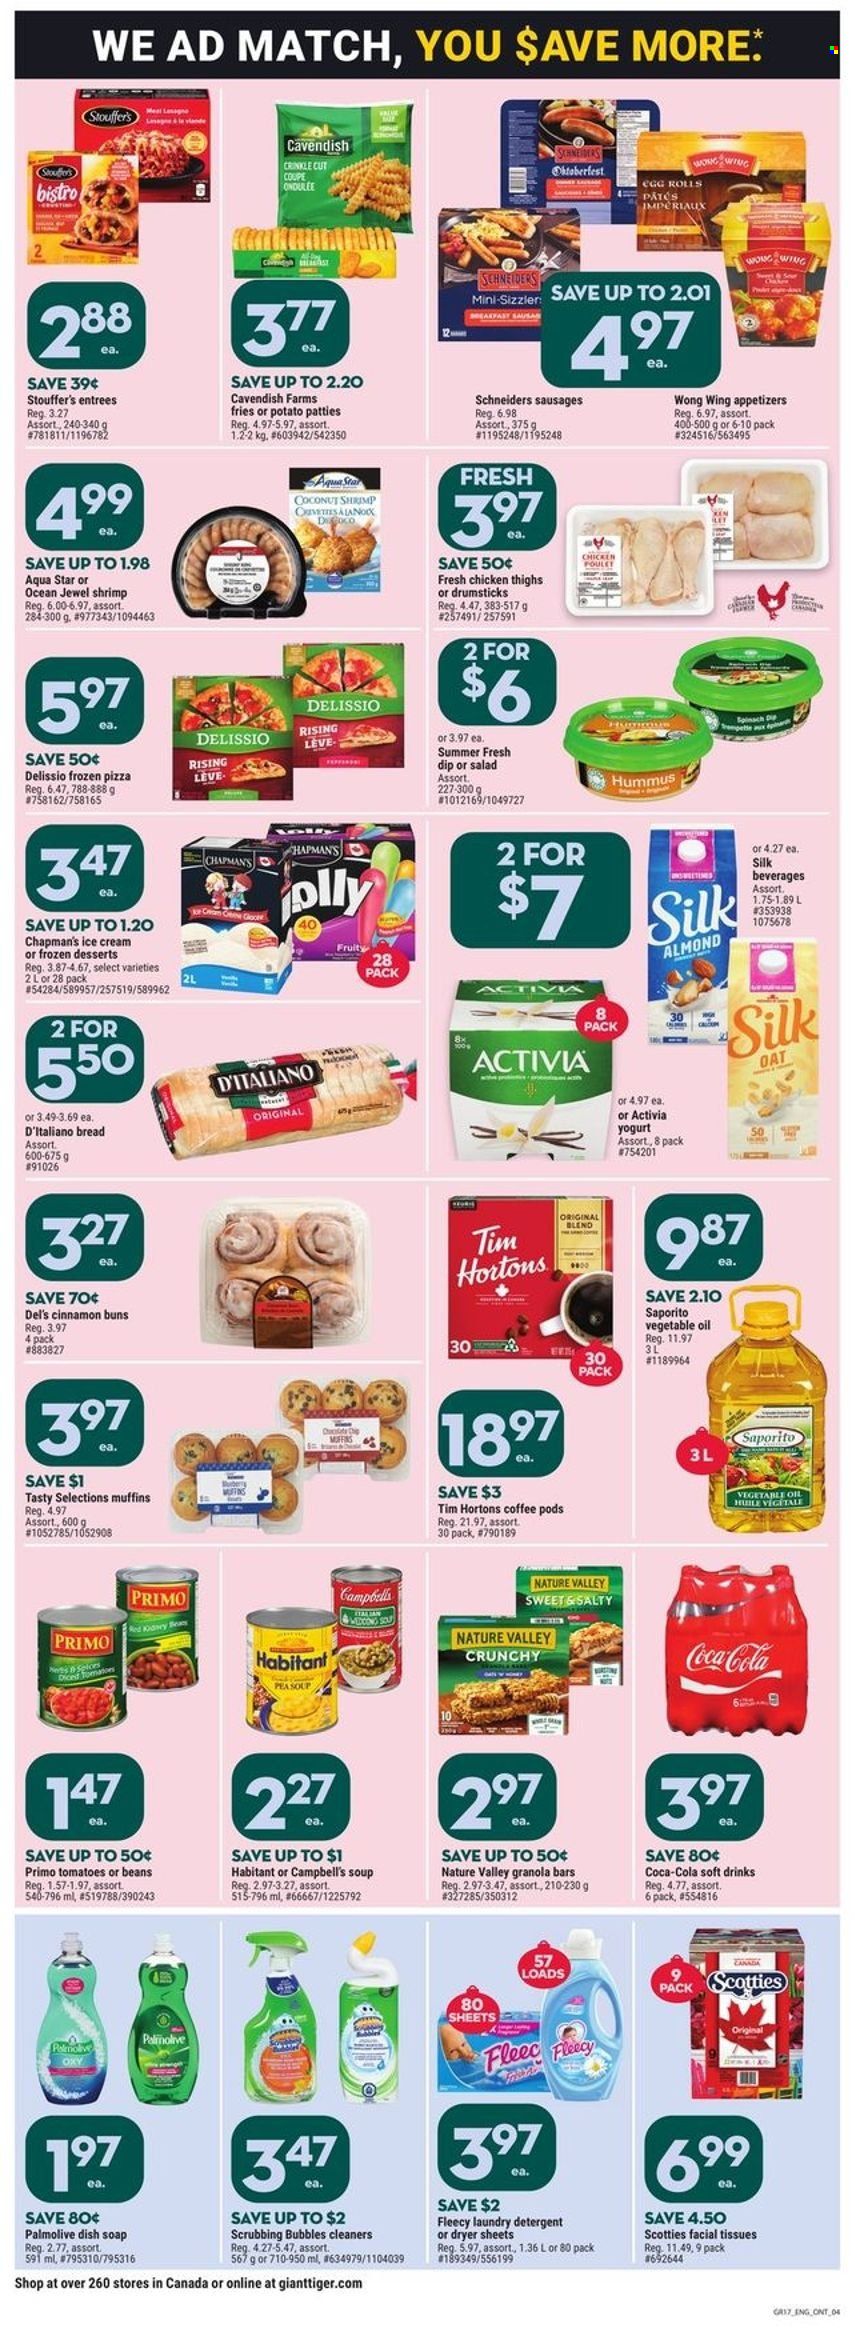 thumbnail - Giant Tiger Flyer - November 23, 2022 - November 29, 2022 - Sales products - bread, buns, muffin, shrimps, Campbell's, pizza, soup, egg rolls, sausage, hummus, yoghurt, Activia, dip, ice cream, Stouffer's, potato fries, granola bar, Nature Valley, cinnamon, vegetable oil, oil, Coca-Cola, soft drink, coffee pods, chicken thighs, chicken, tissues, Scrubbing Bubbles, laundry detergent, dryer sheets, Palmolive, soap, facial tissues, detergent. Page 4.